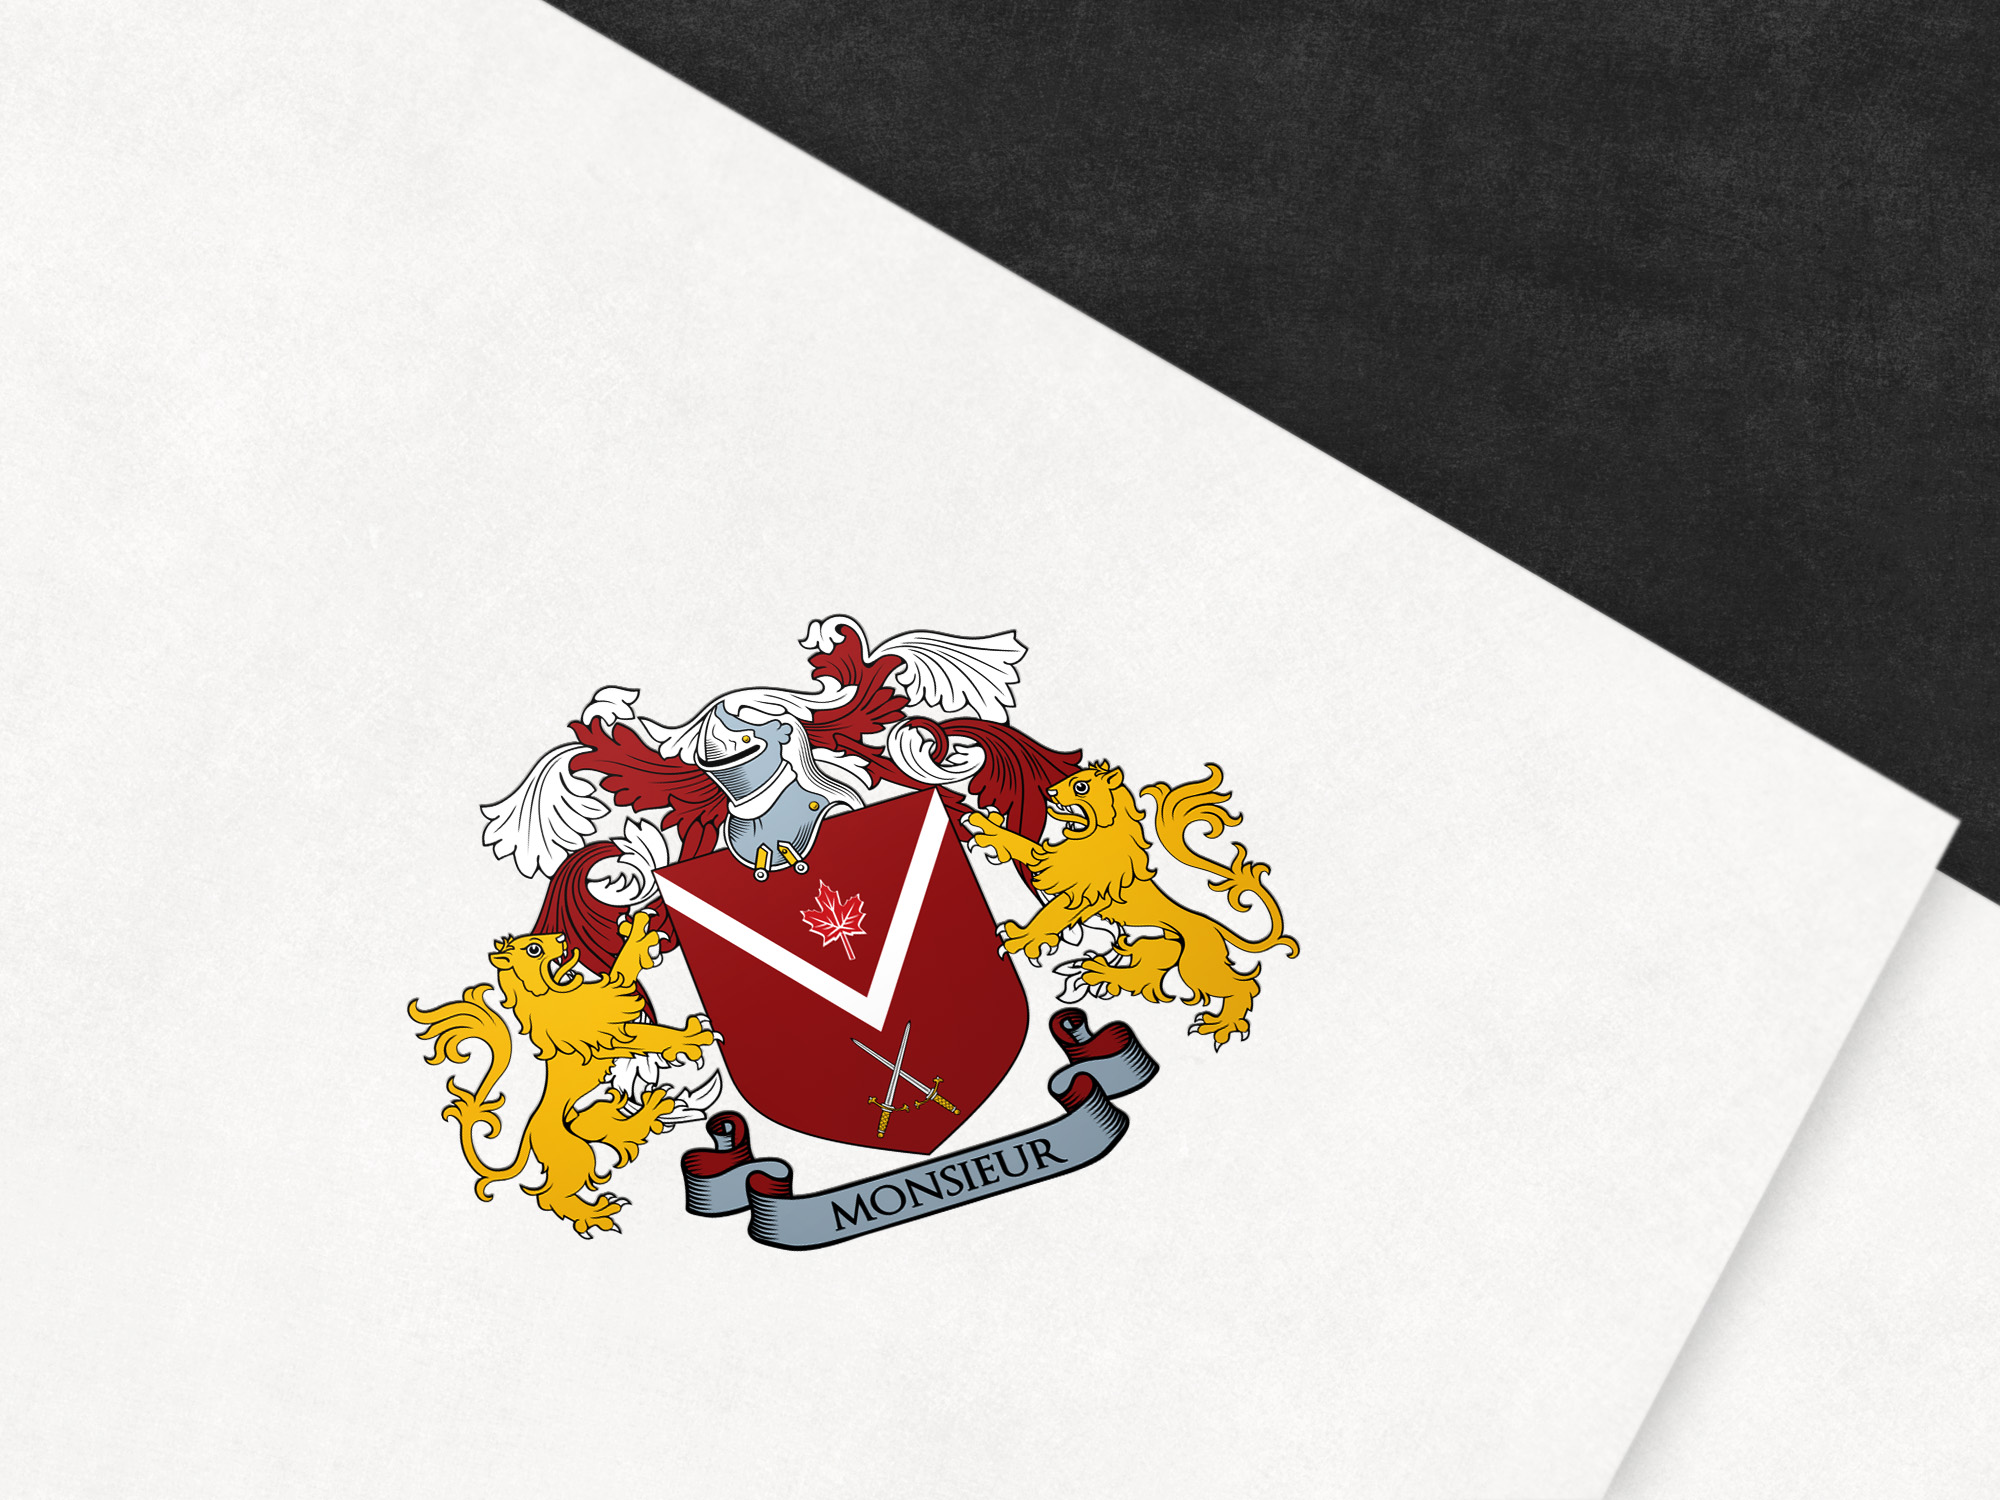 Coat of arms designed for the Monsieur family from Canada